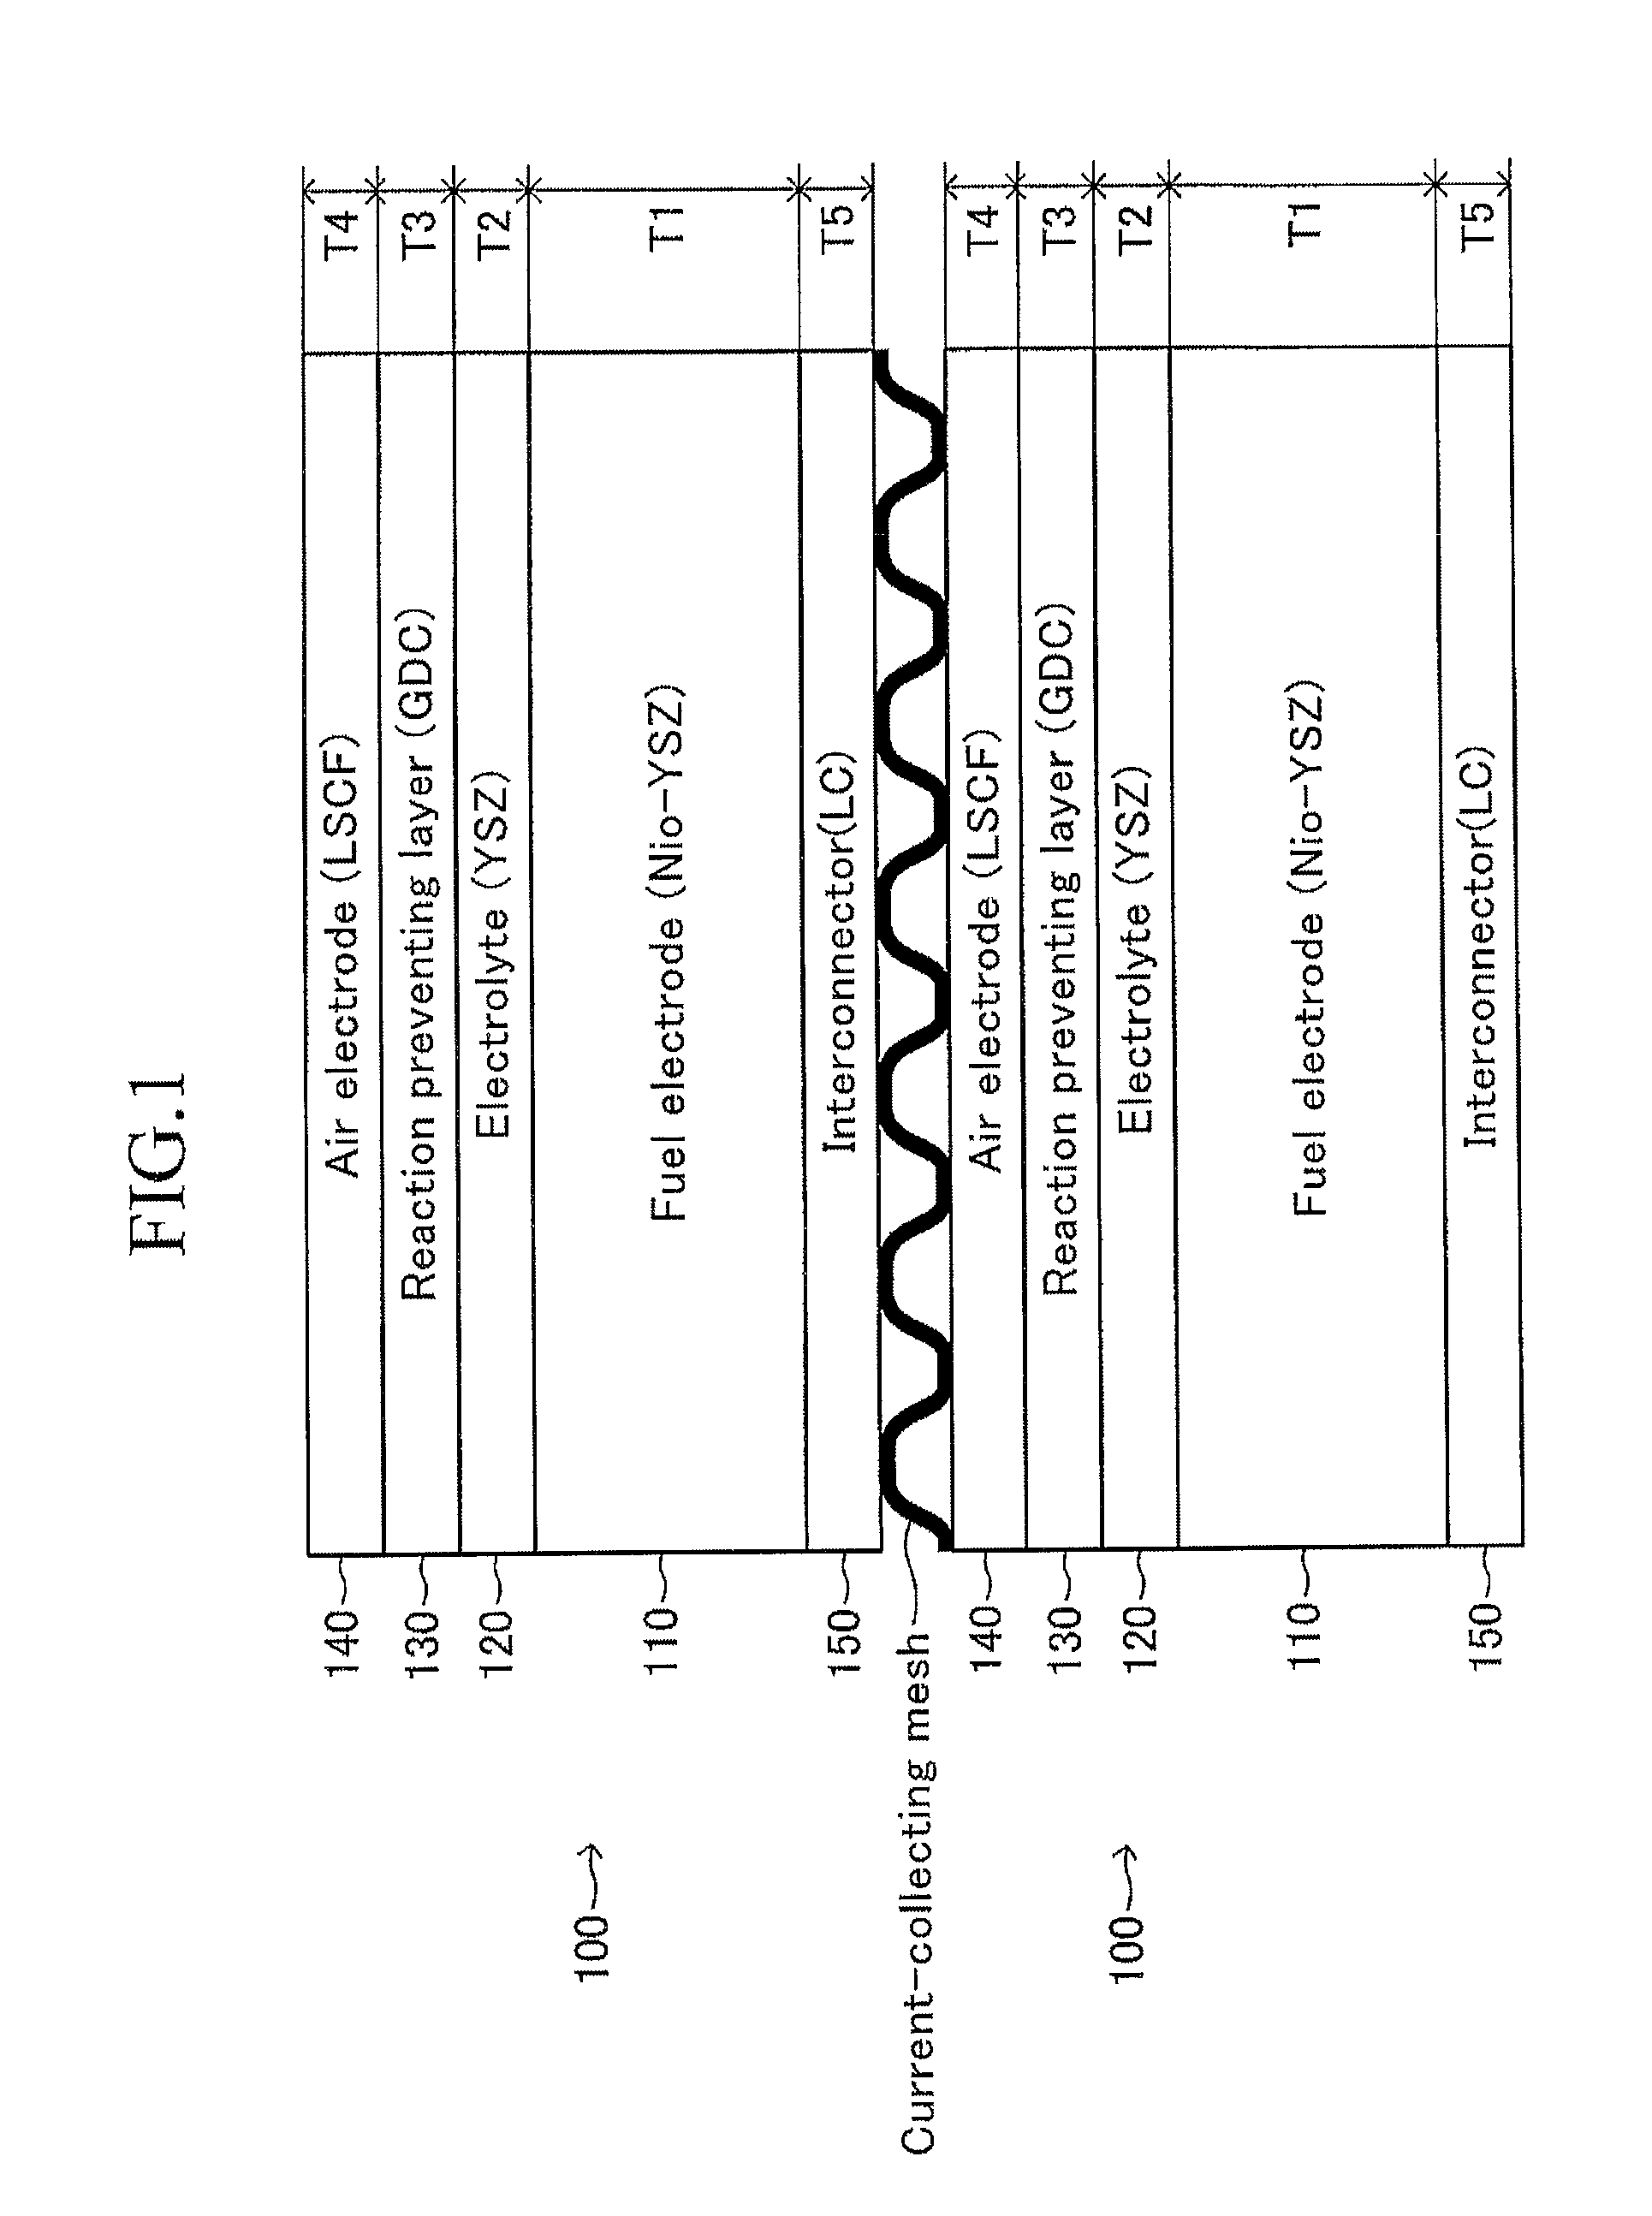 Solid oxide fuel cell including electrode containing dense bonding portions and porous non-bonding portions